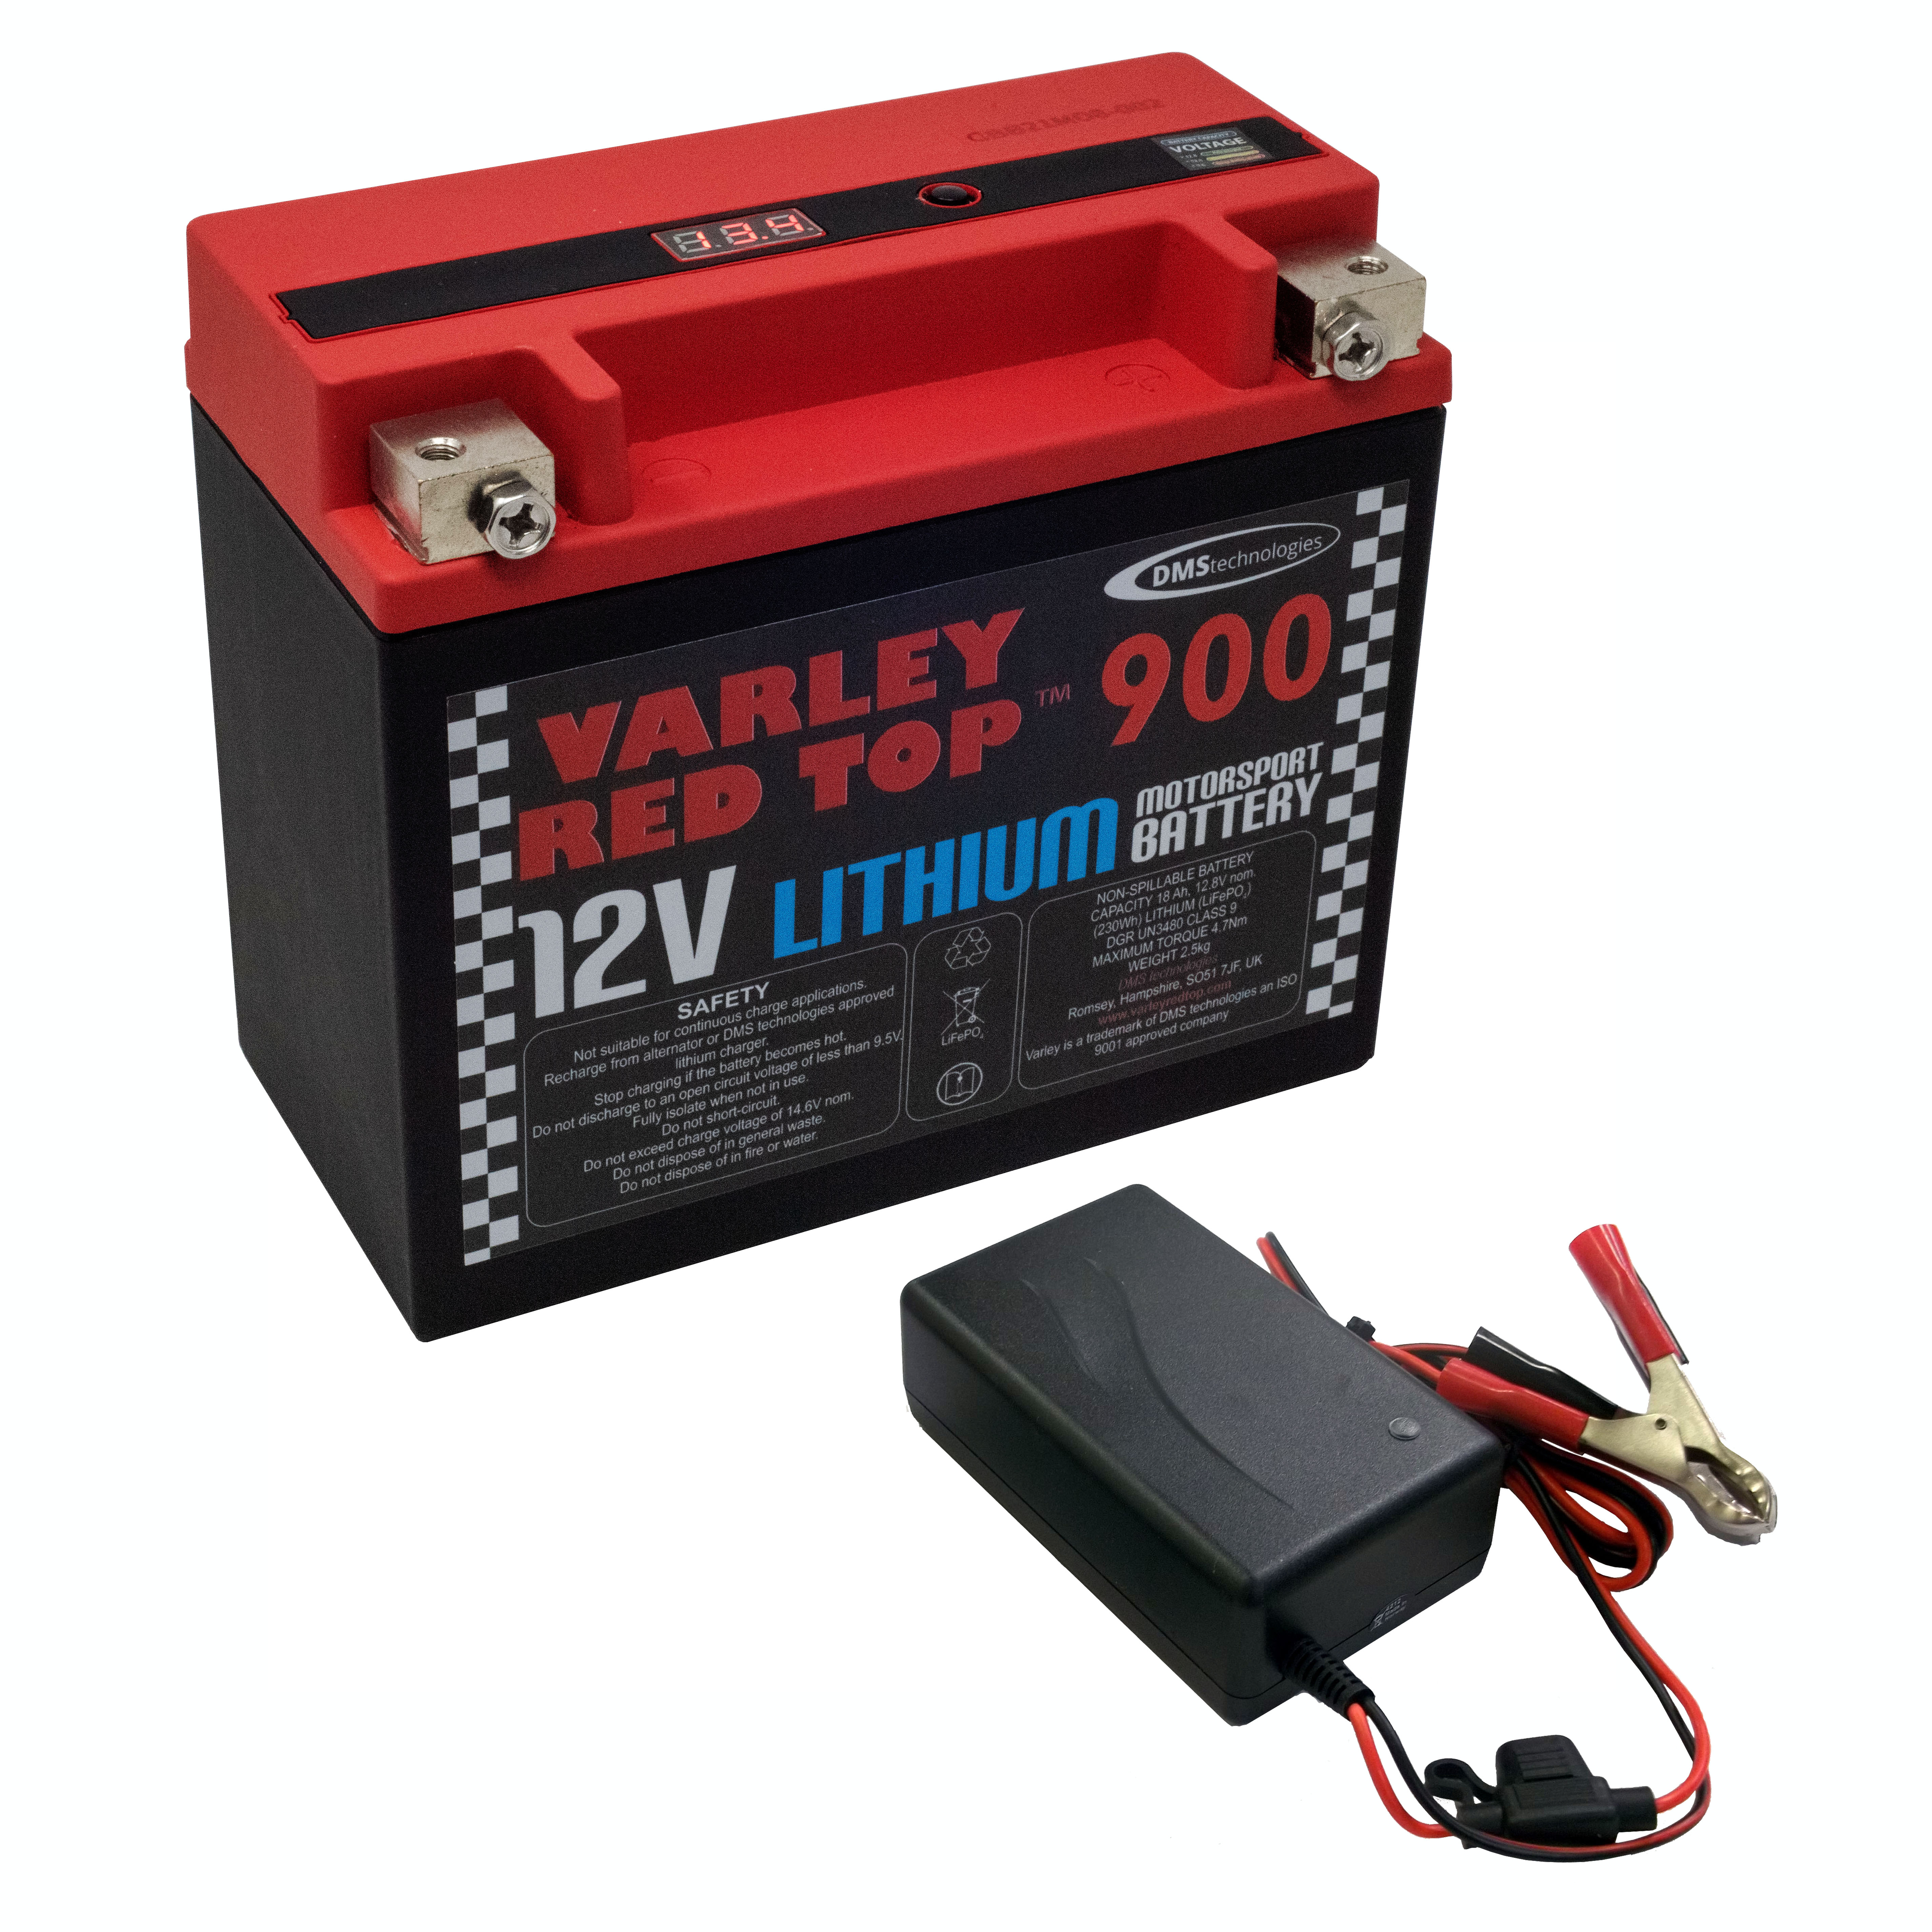 Varley Lithium 900 Battery & Li 6A Charger